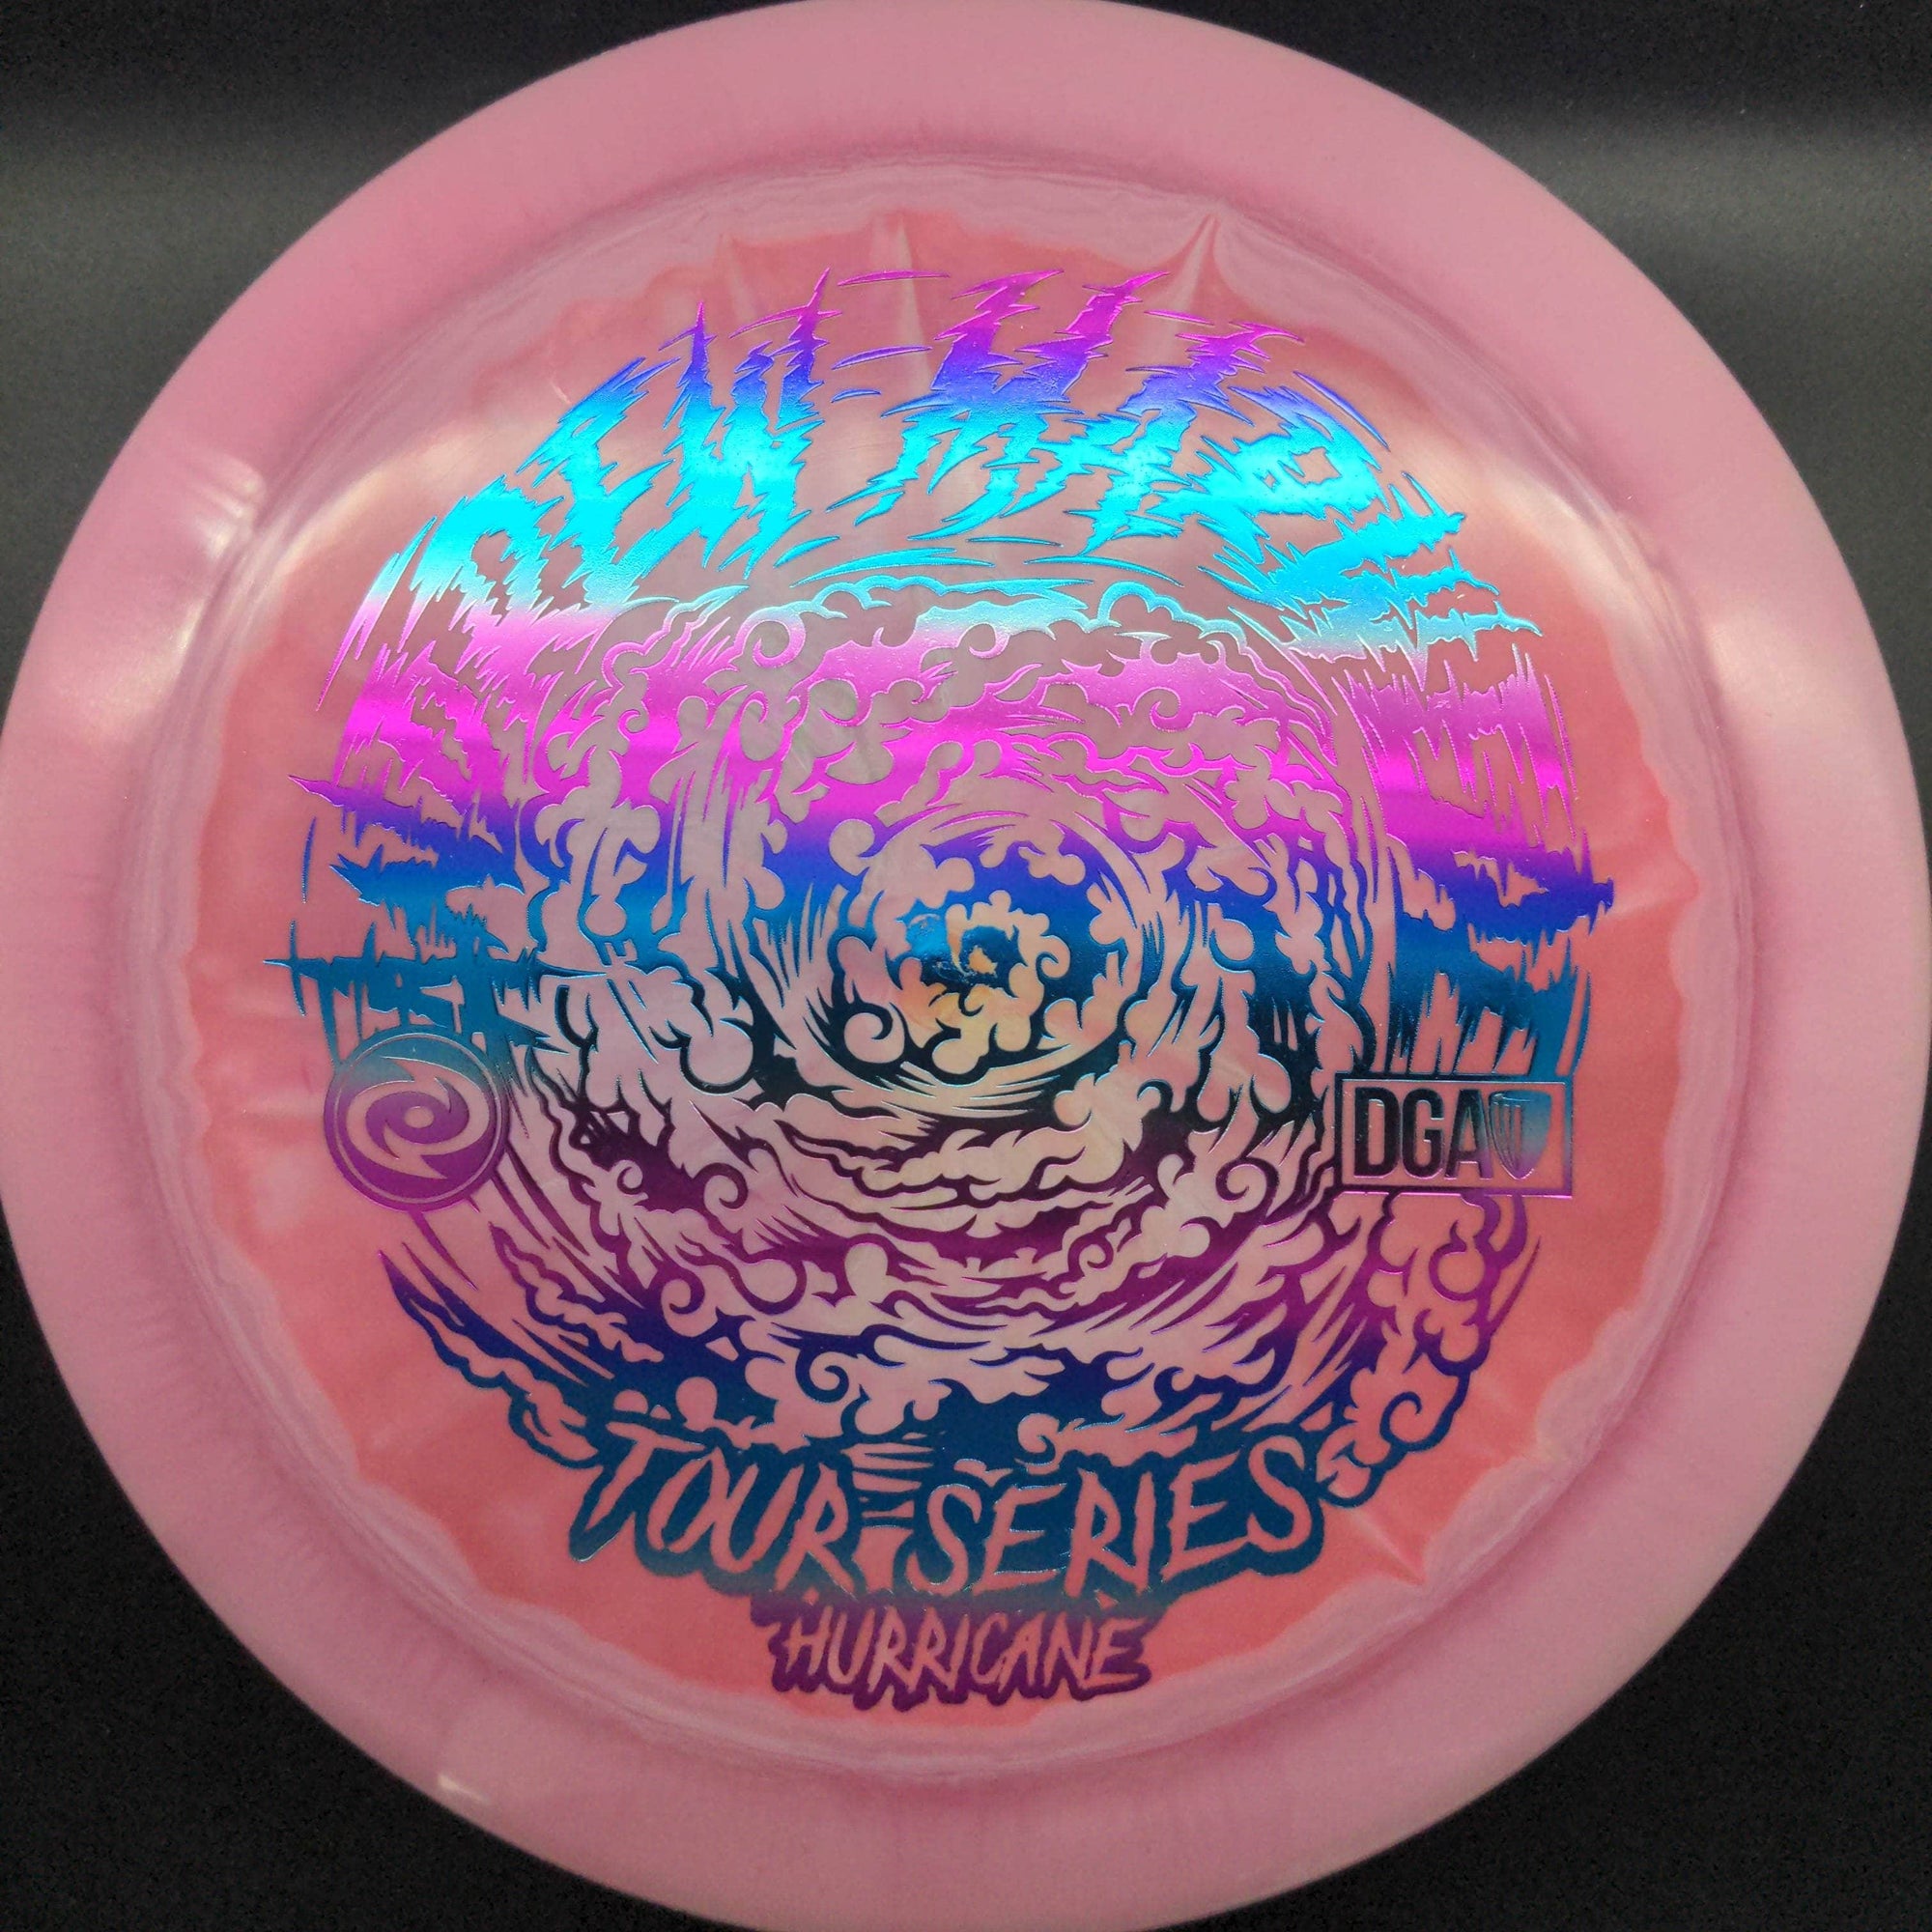 DGA Distance Driver Pink Blue Sunset Stamp 174g Hurricane, Swirl Proline, Andrew Marwede Tour Series